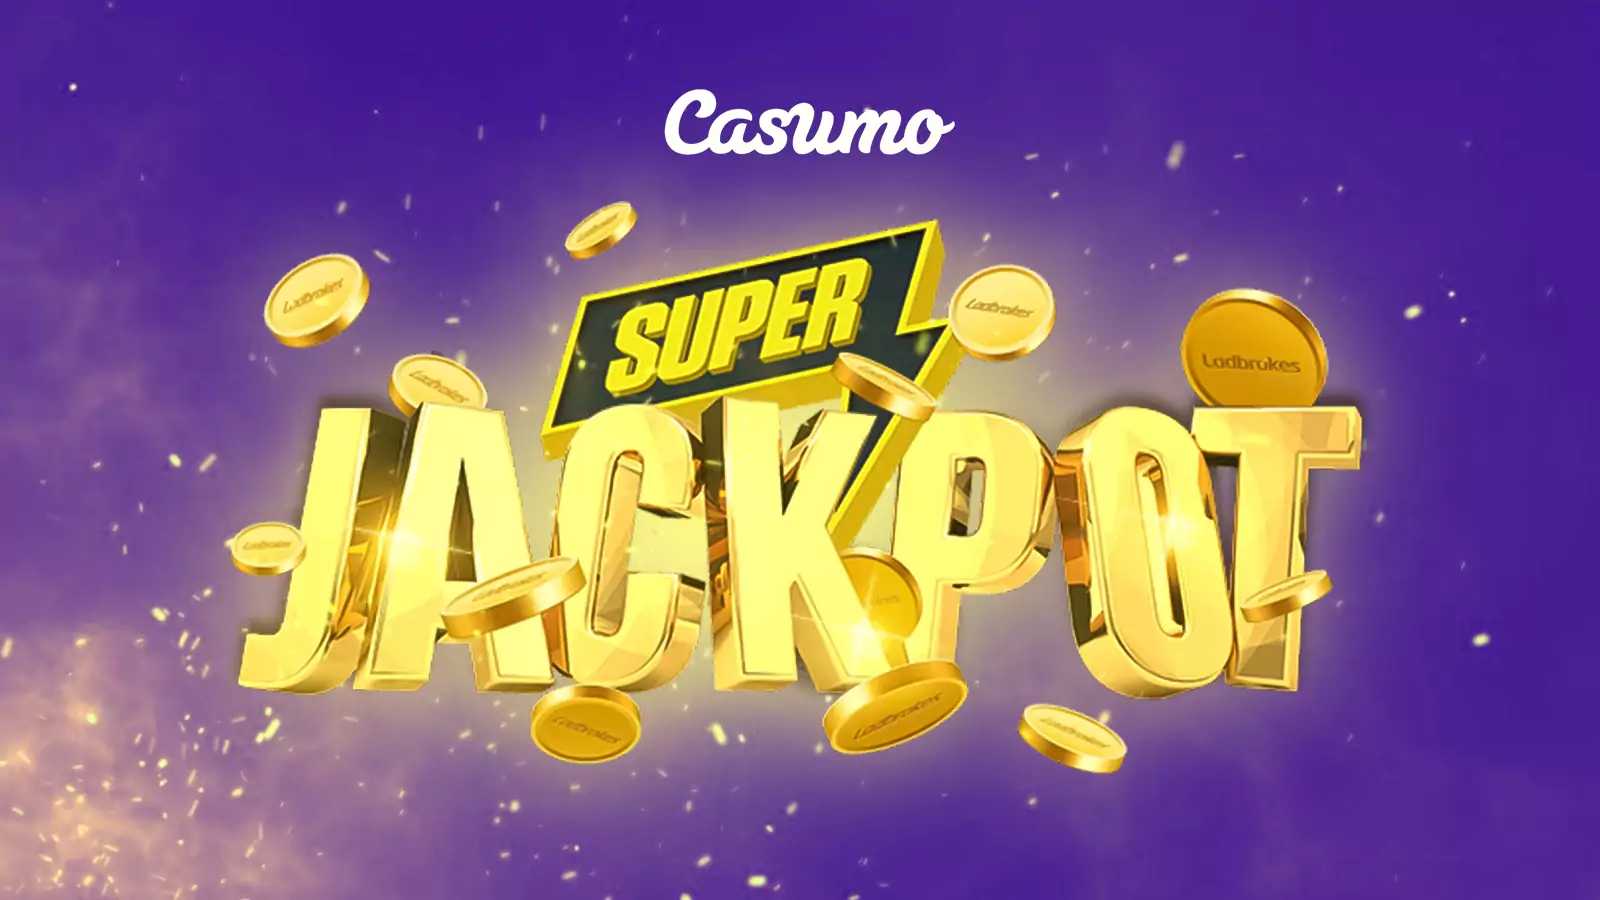 Try to win a part of a progressive jackpot in the Casumo jackpot games.